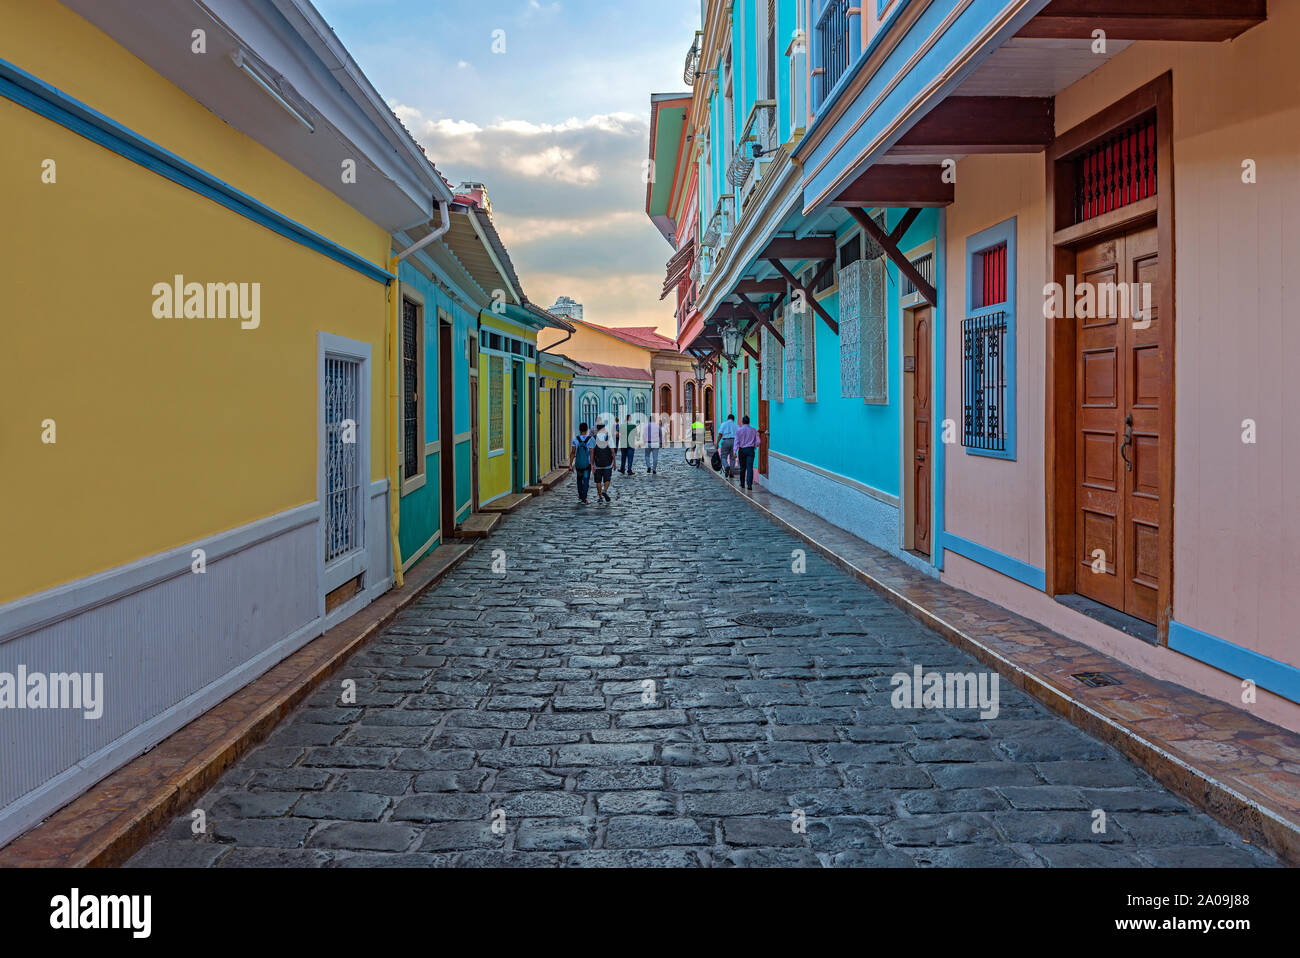 People walking by the colonial style architecture cobblestone street of Guayaquil at sunset, Santa Ana Hill, Las Penas District, Guayaquil, Ecuador. Stock Photo